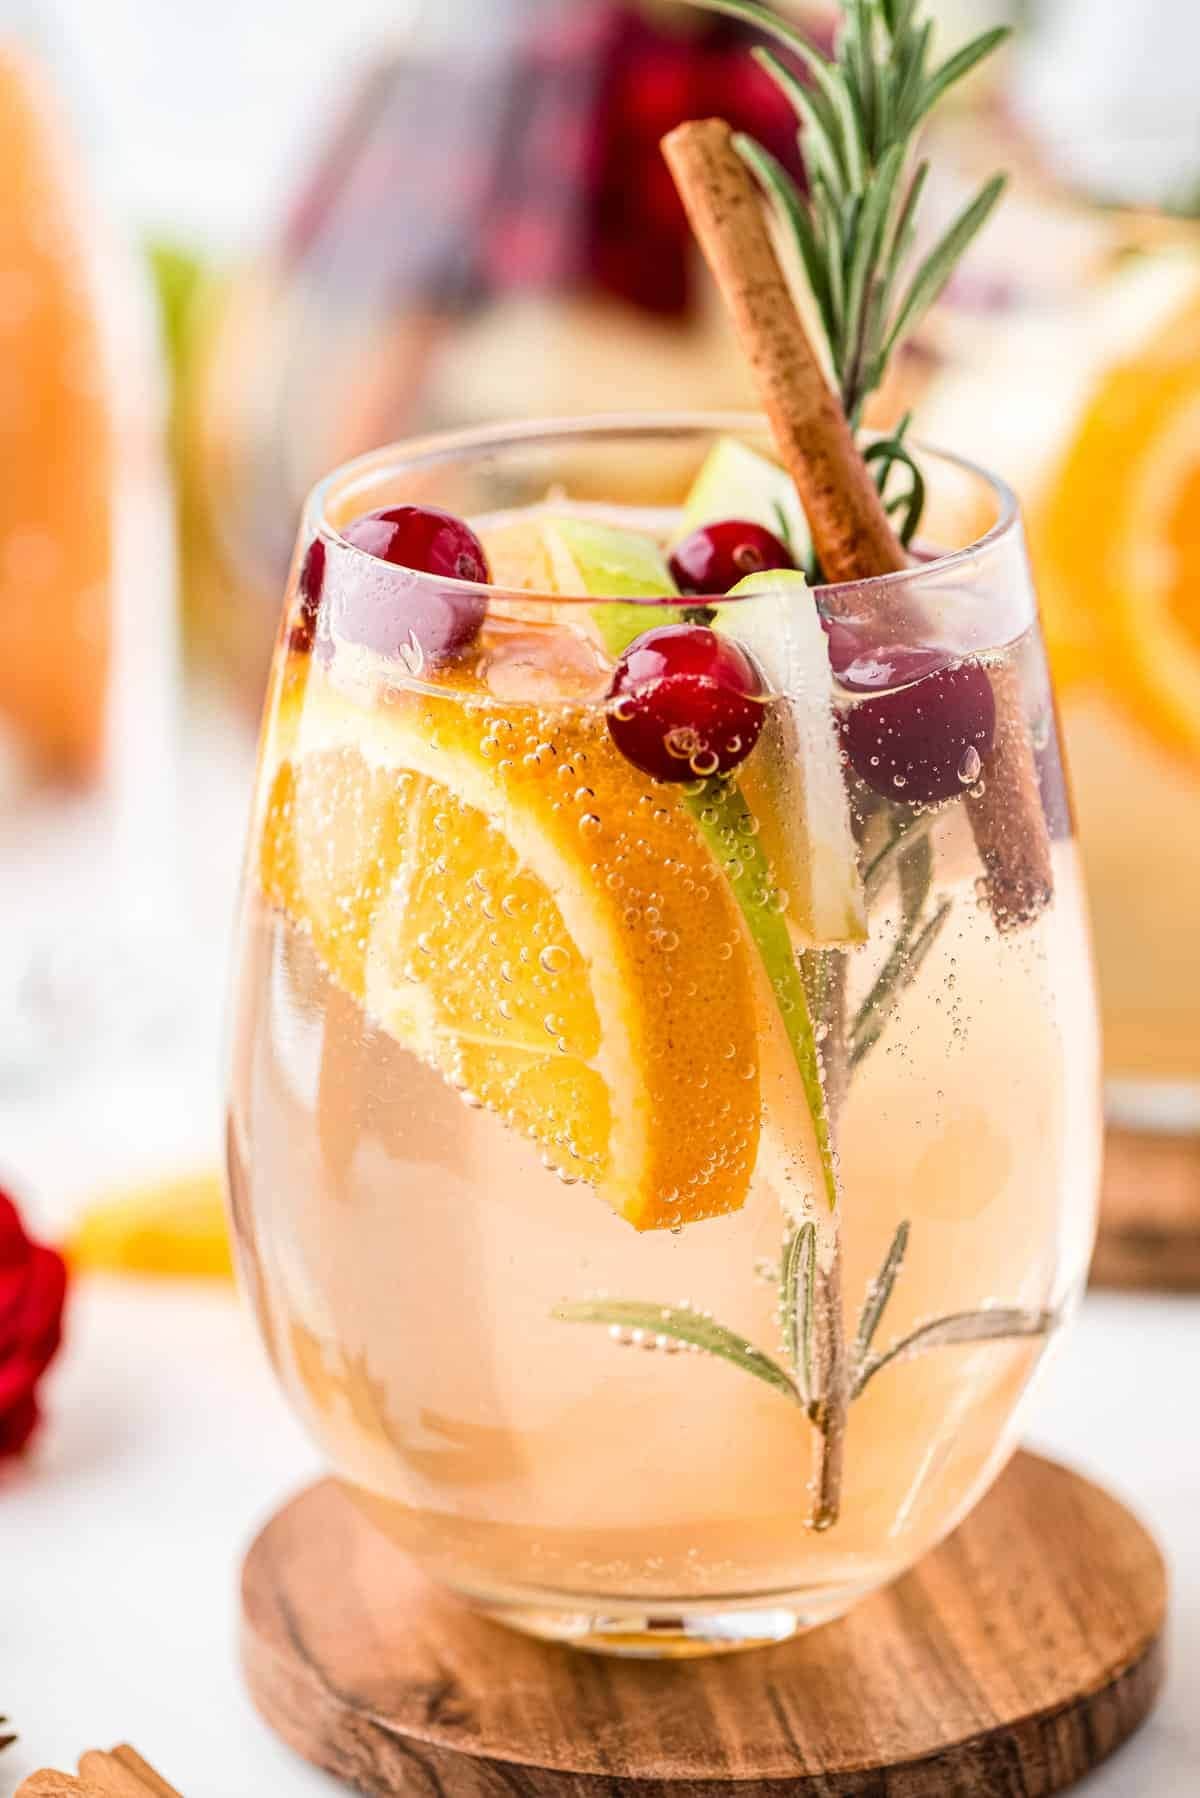 White sangria on a glass garnished with cranberries, orange slices, pears and cinnamon stick.